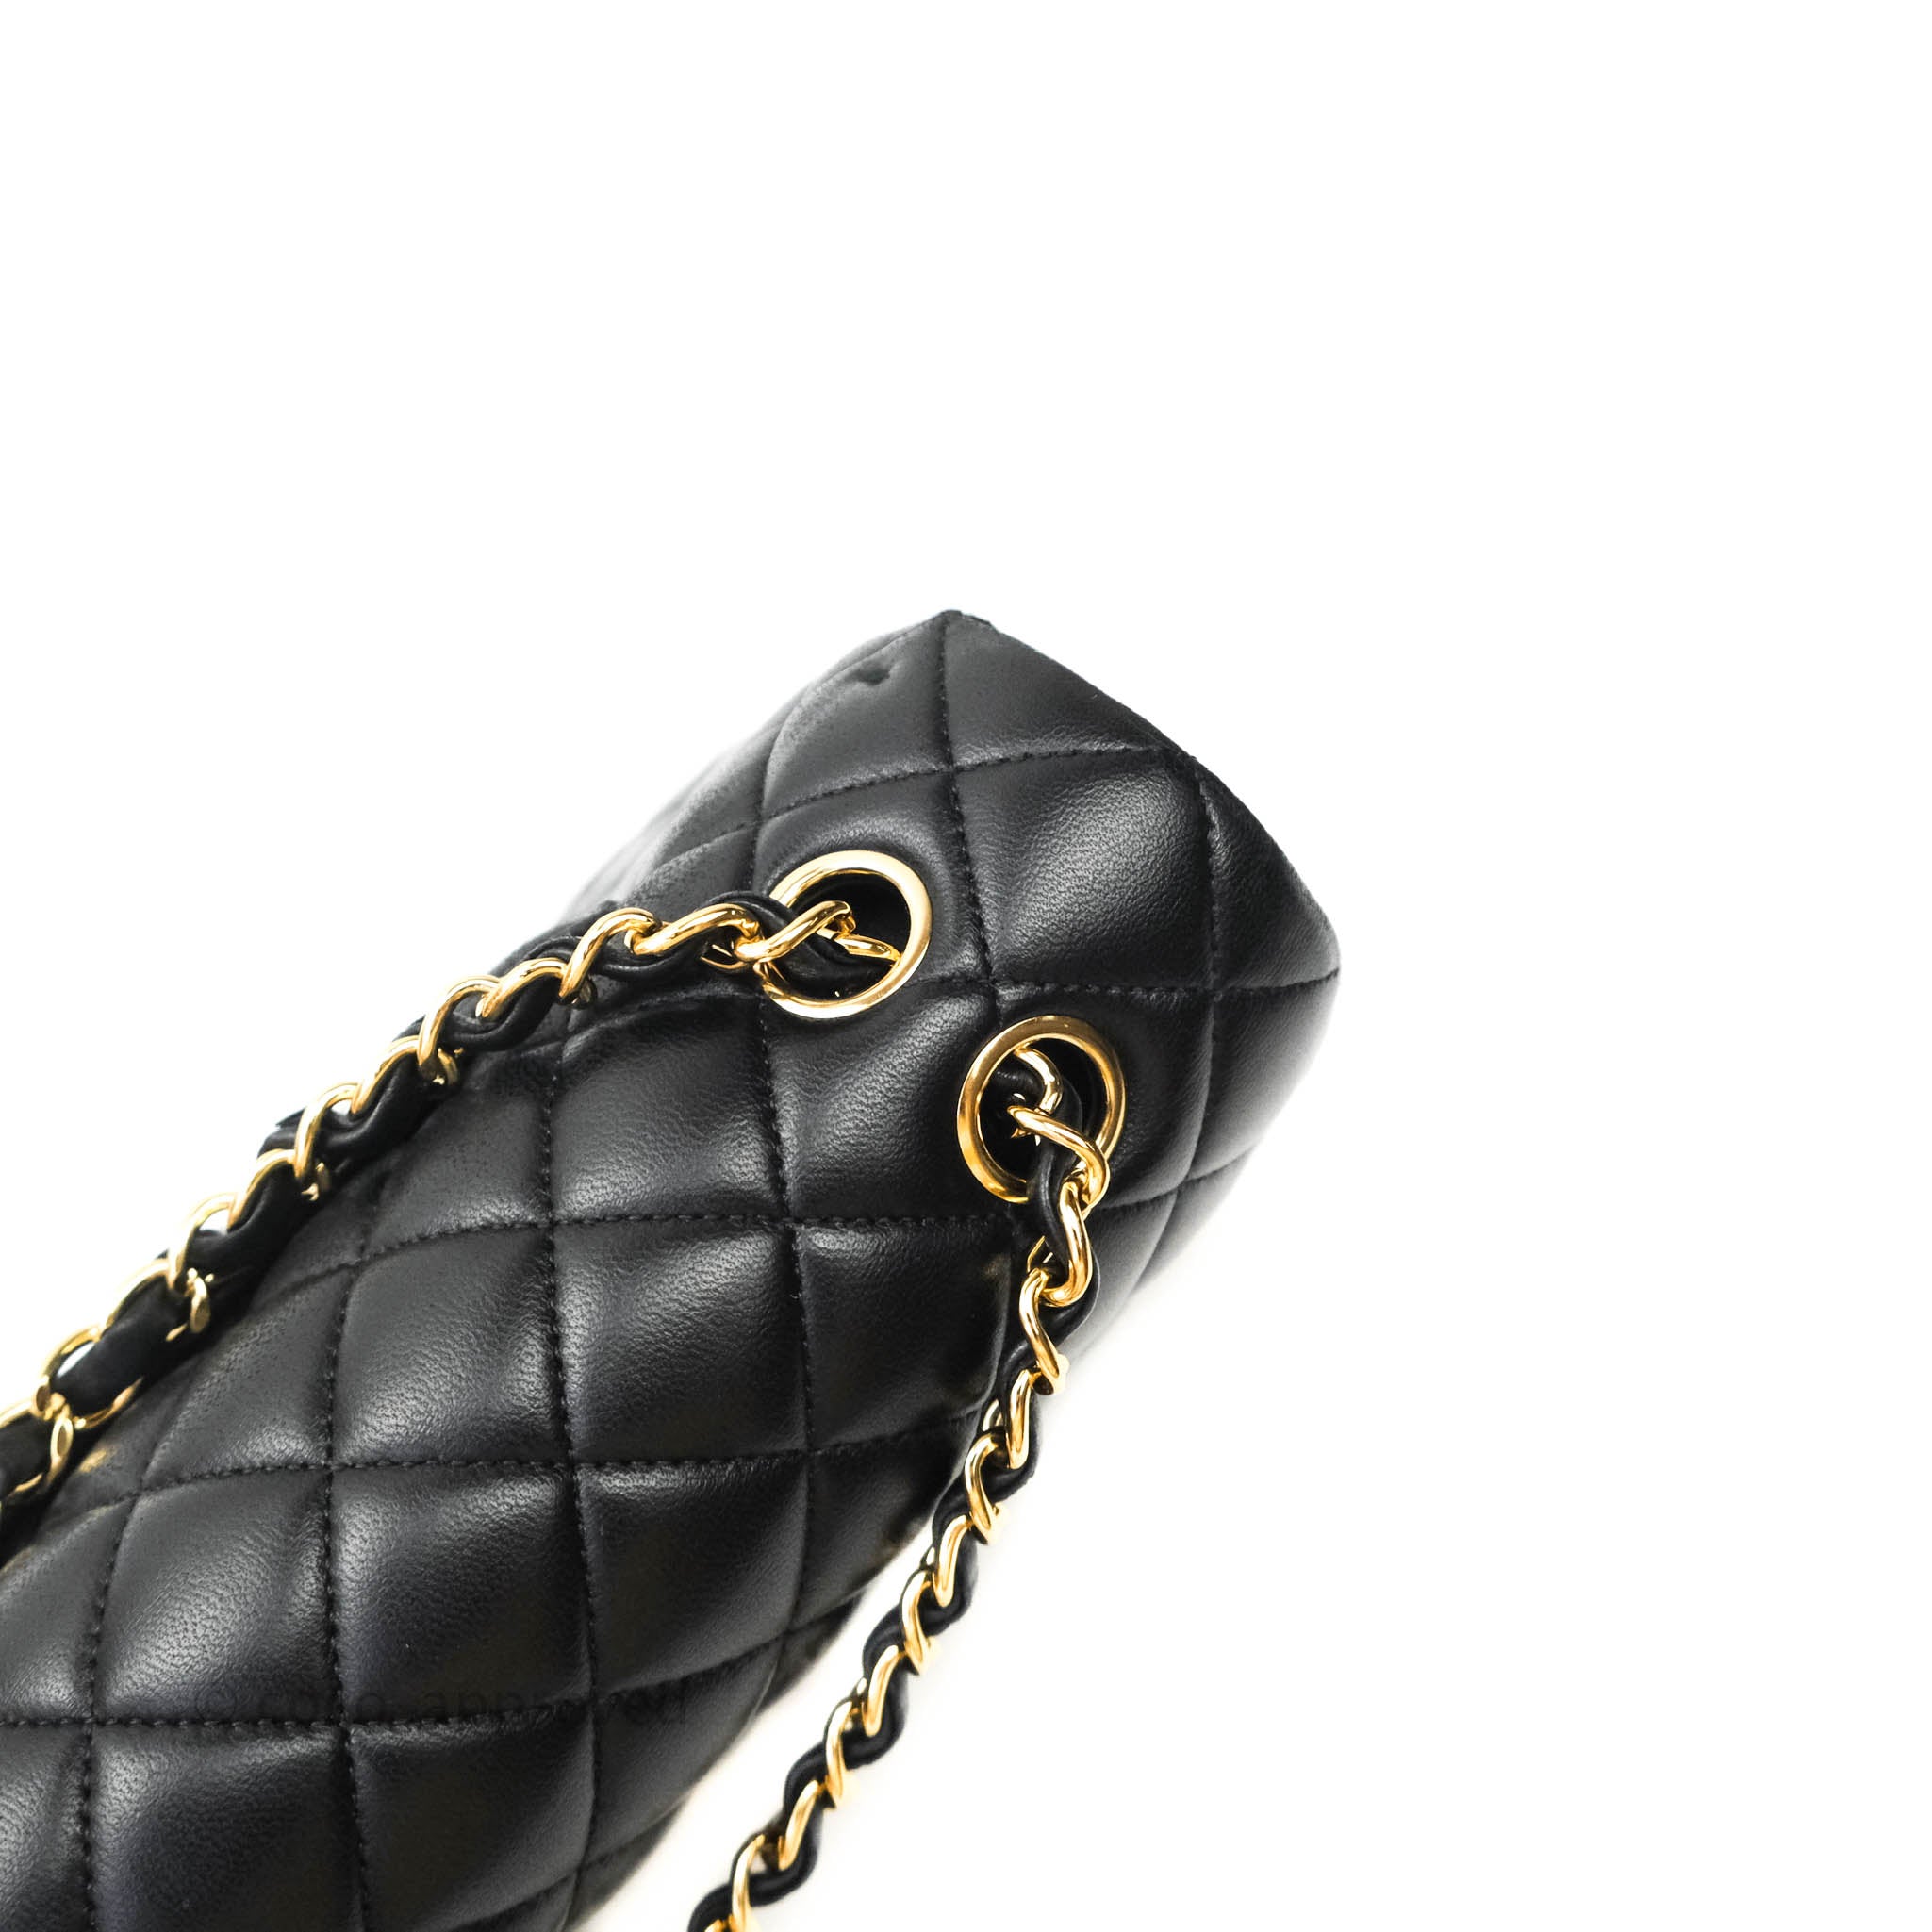 Chanel Classic M/L Medium Double Flap Bag Black Lambskin Gold Hardware – Coco  Approved Studio